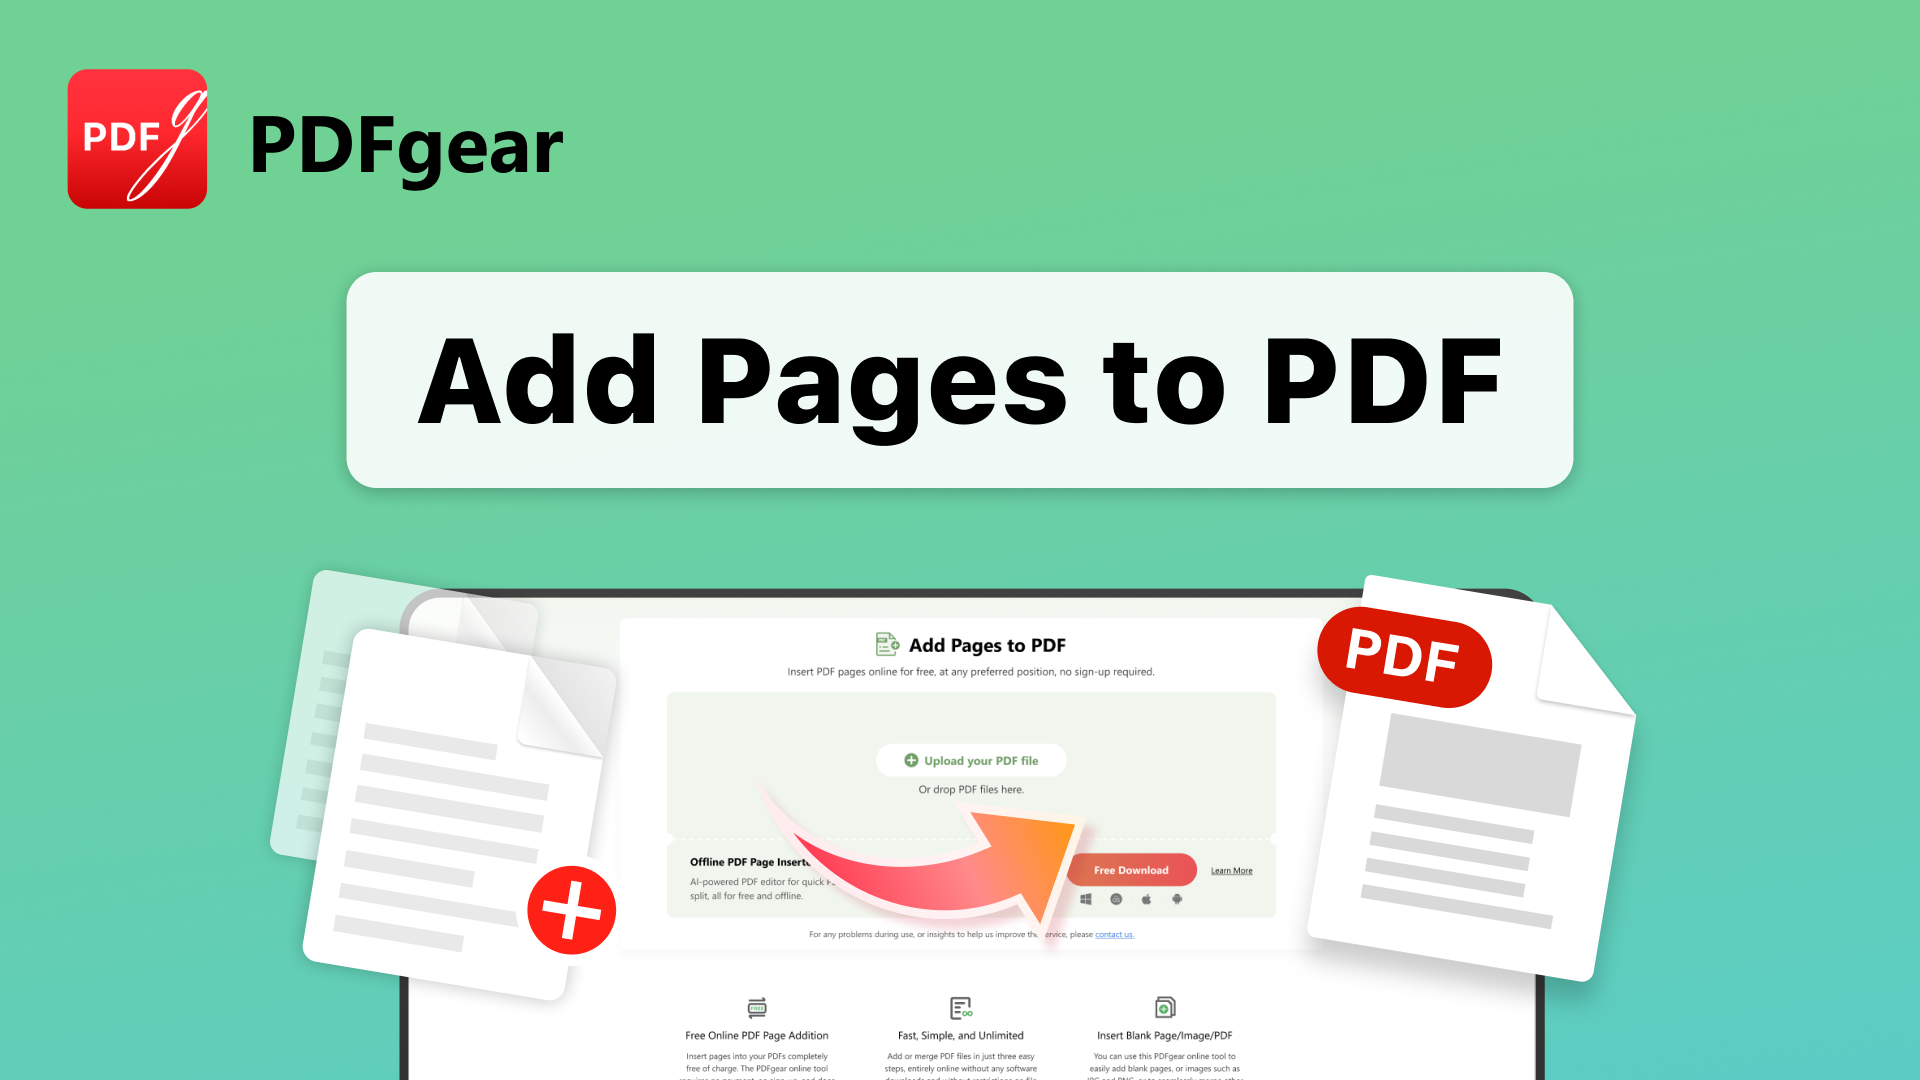 New Online Tool Enables Quick, Registration-Free Addition of PDF Pages